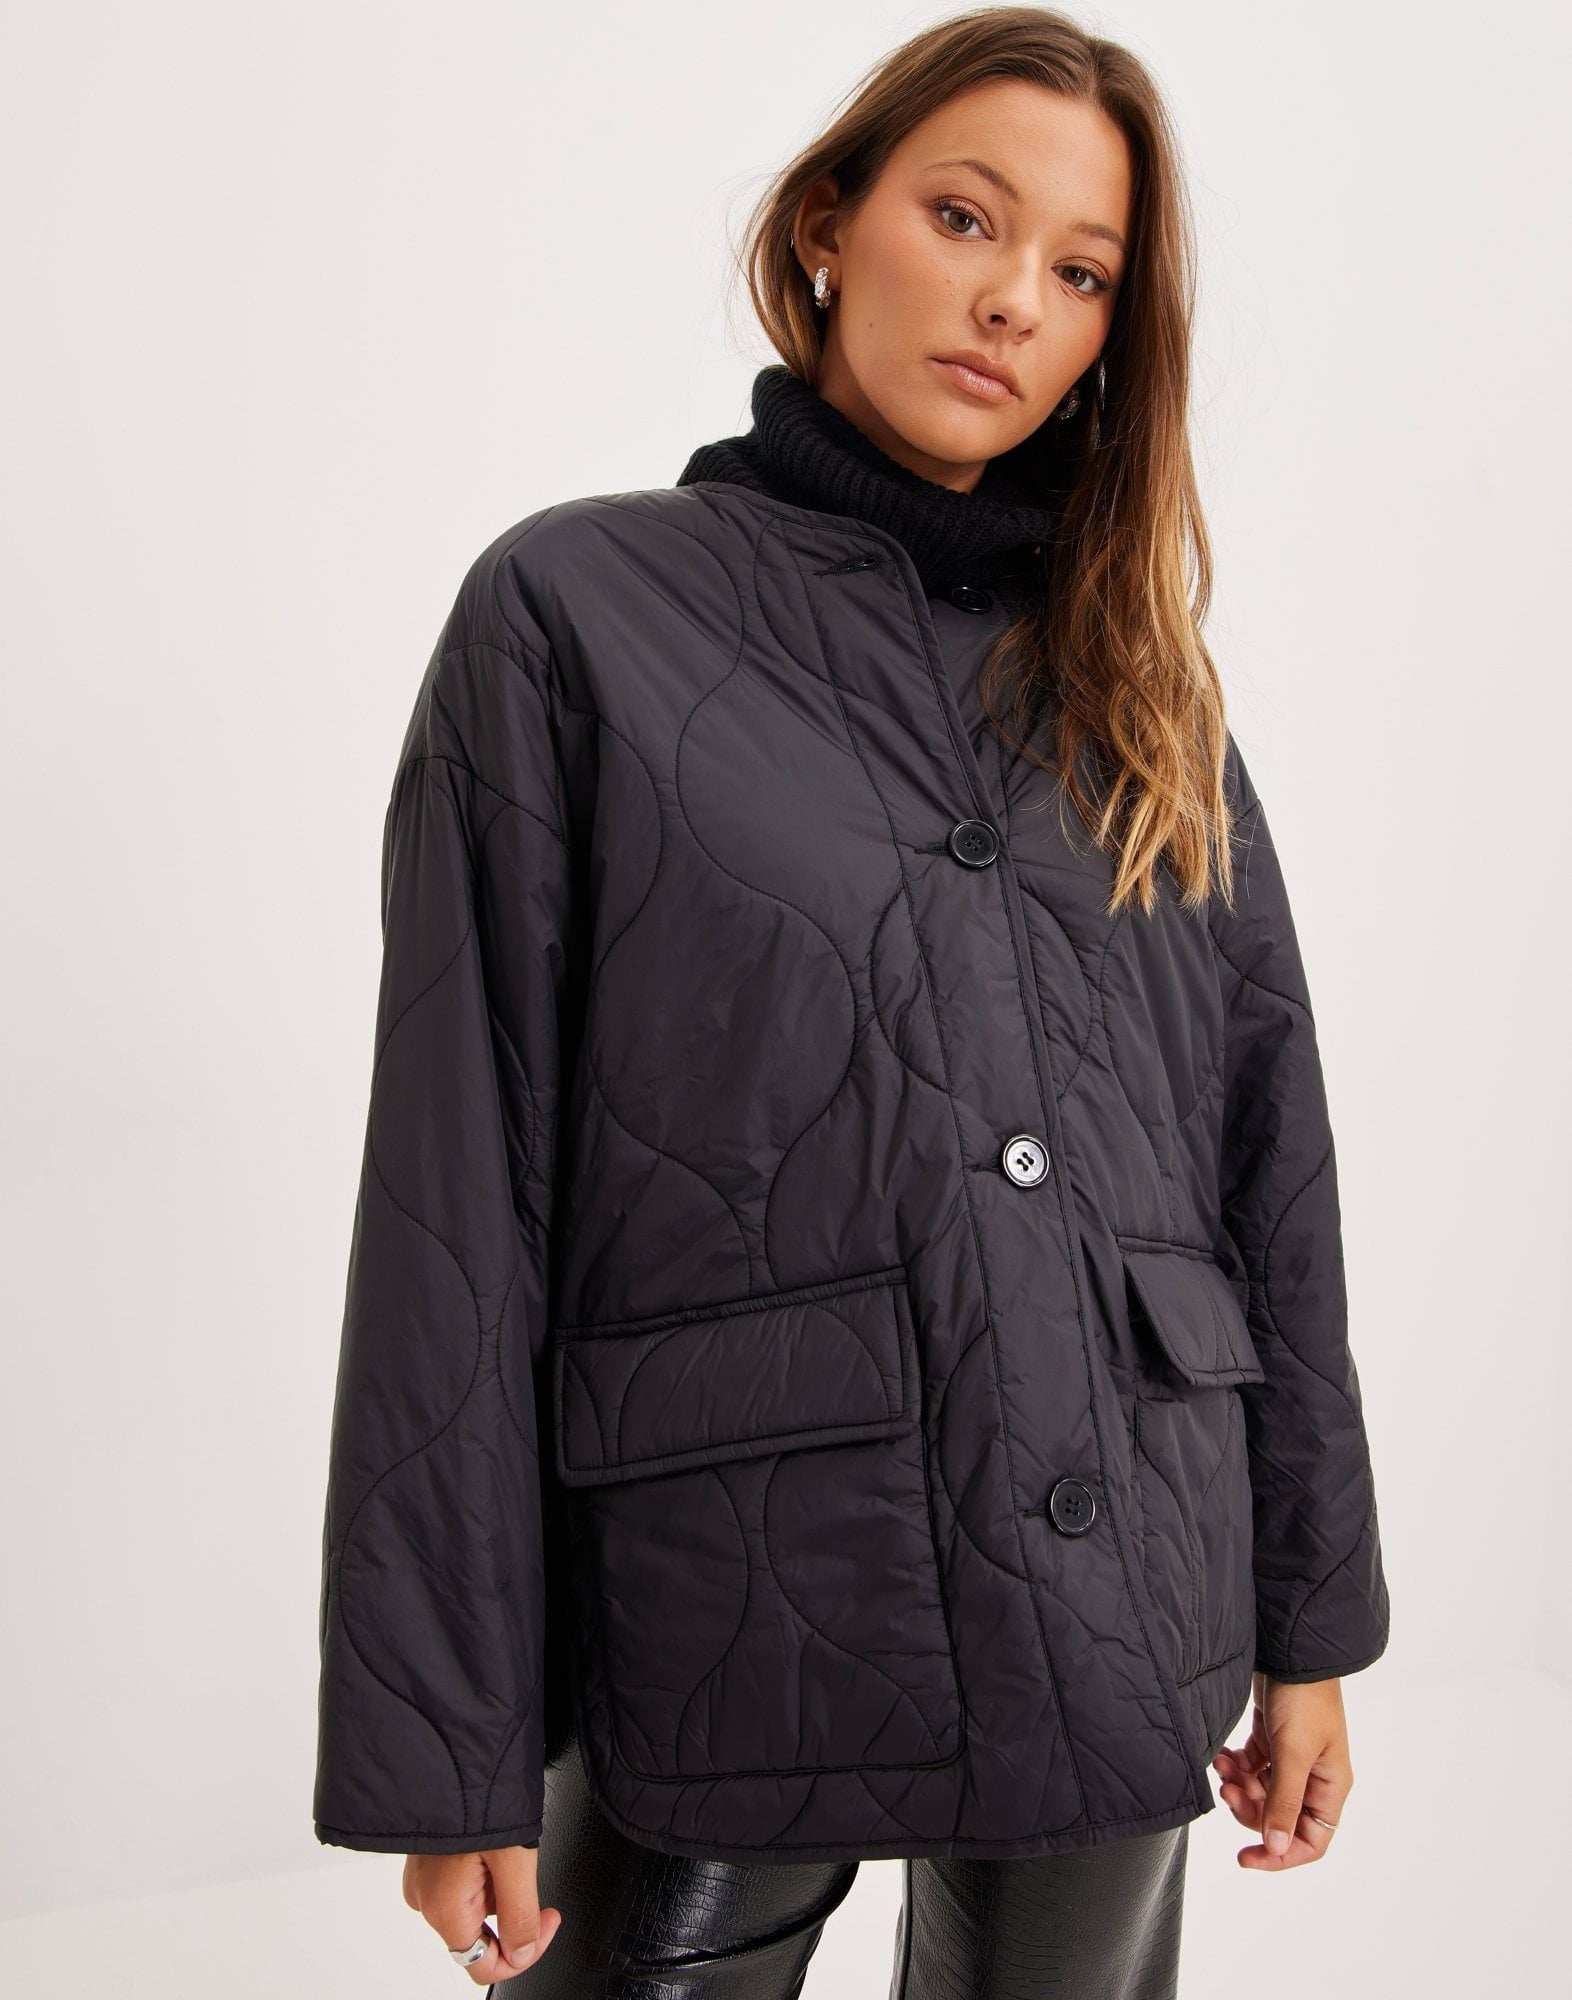 Roxy quilted jacket